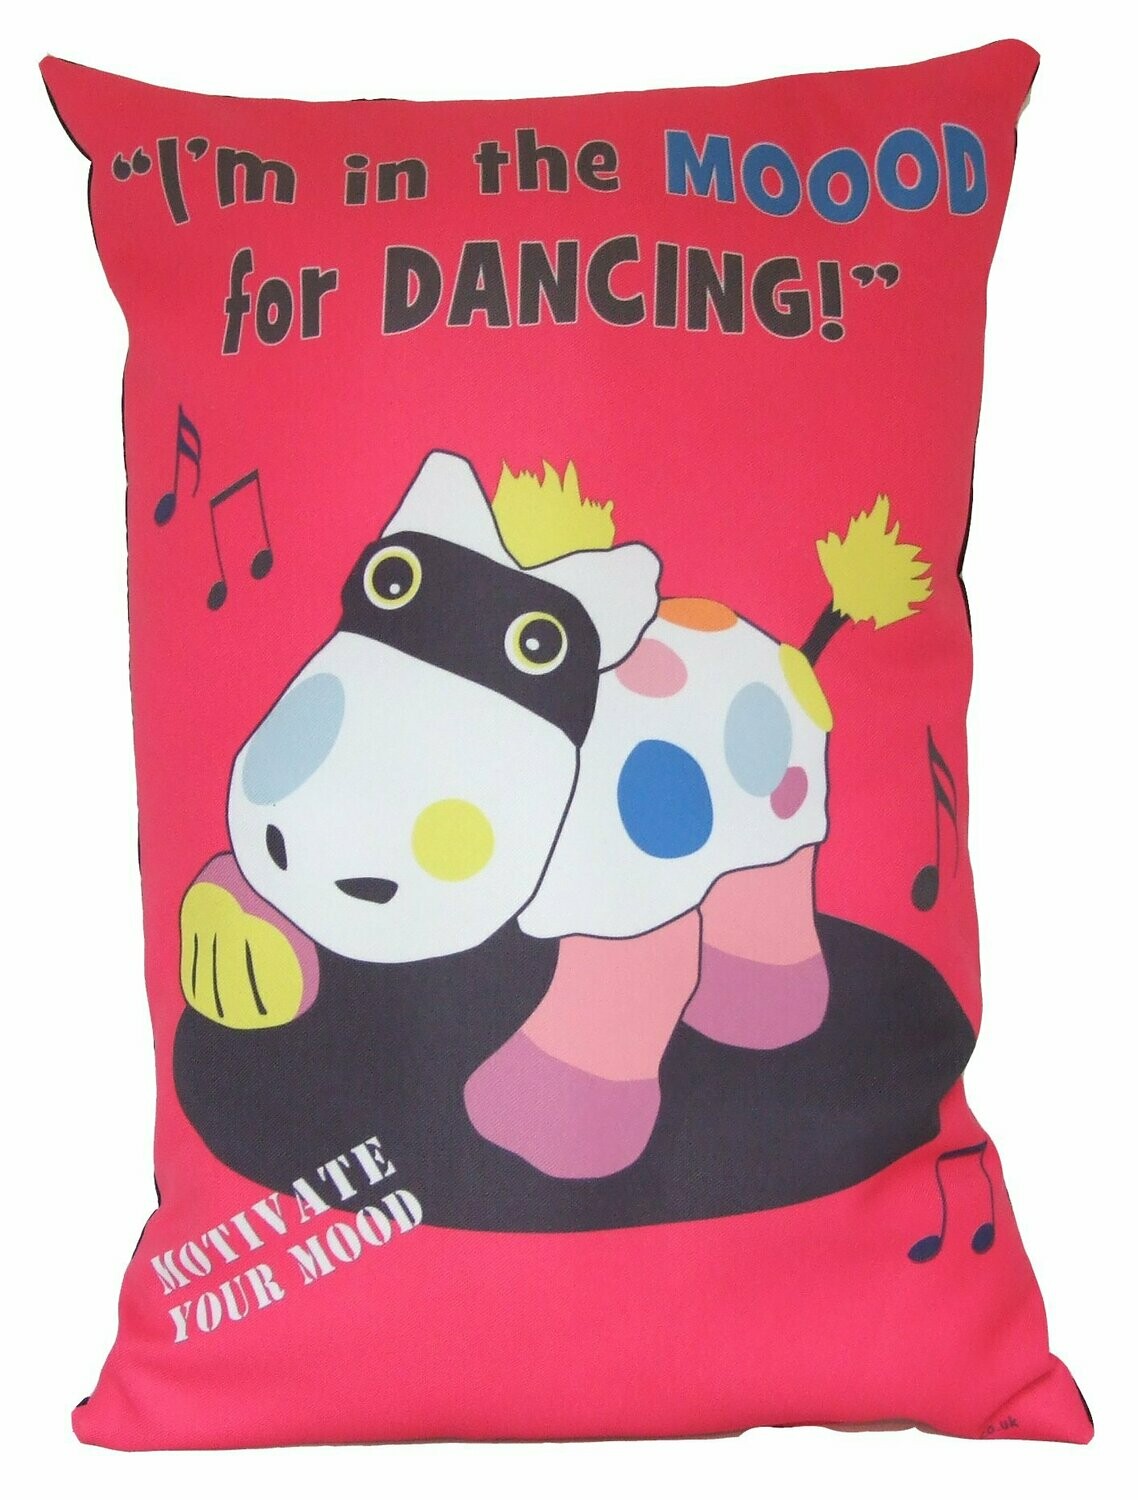 Cuddle Me Happy Cushion - In the Mood for Dancing!